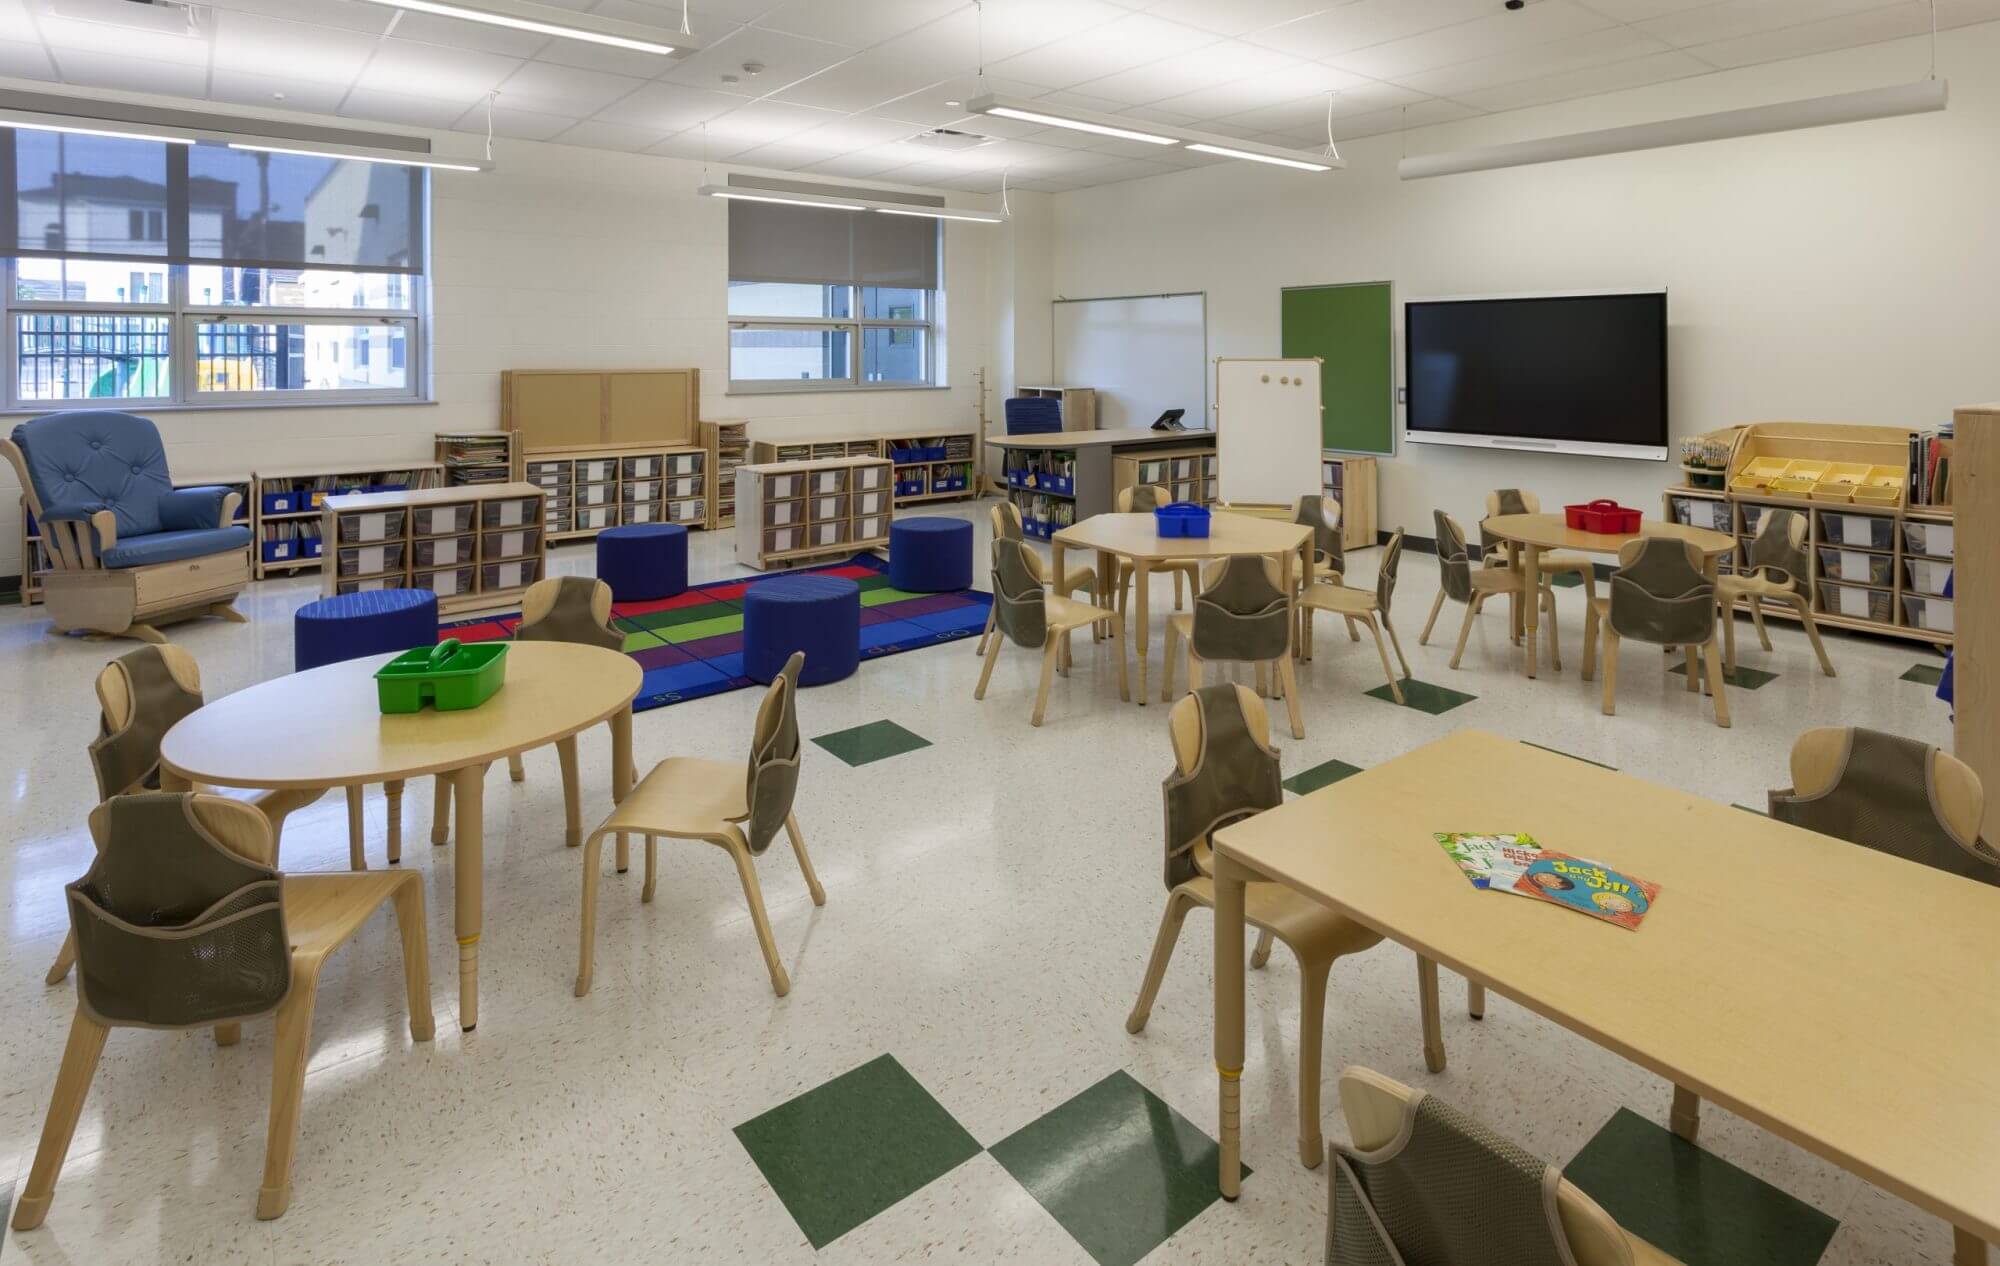 Inside a classroom with multiple tan desks, various shaped chairs, a book area, and a large screen mounted on the wall.